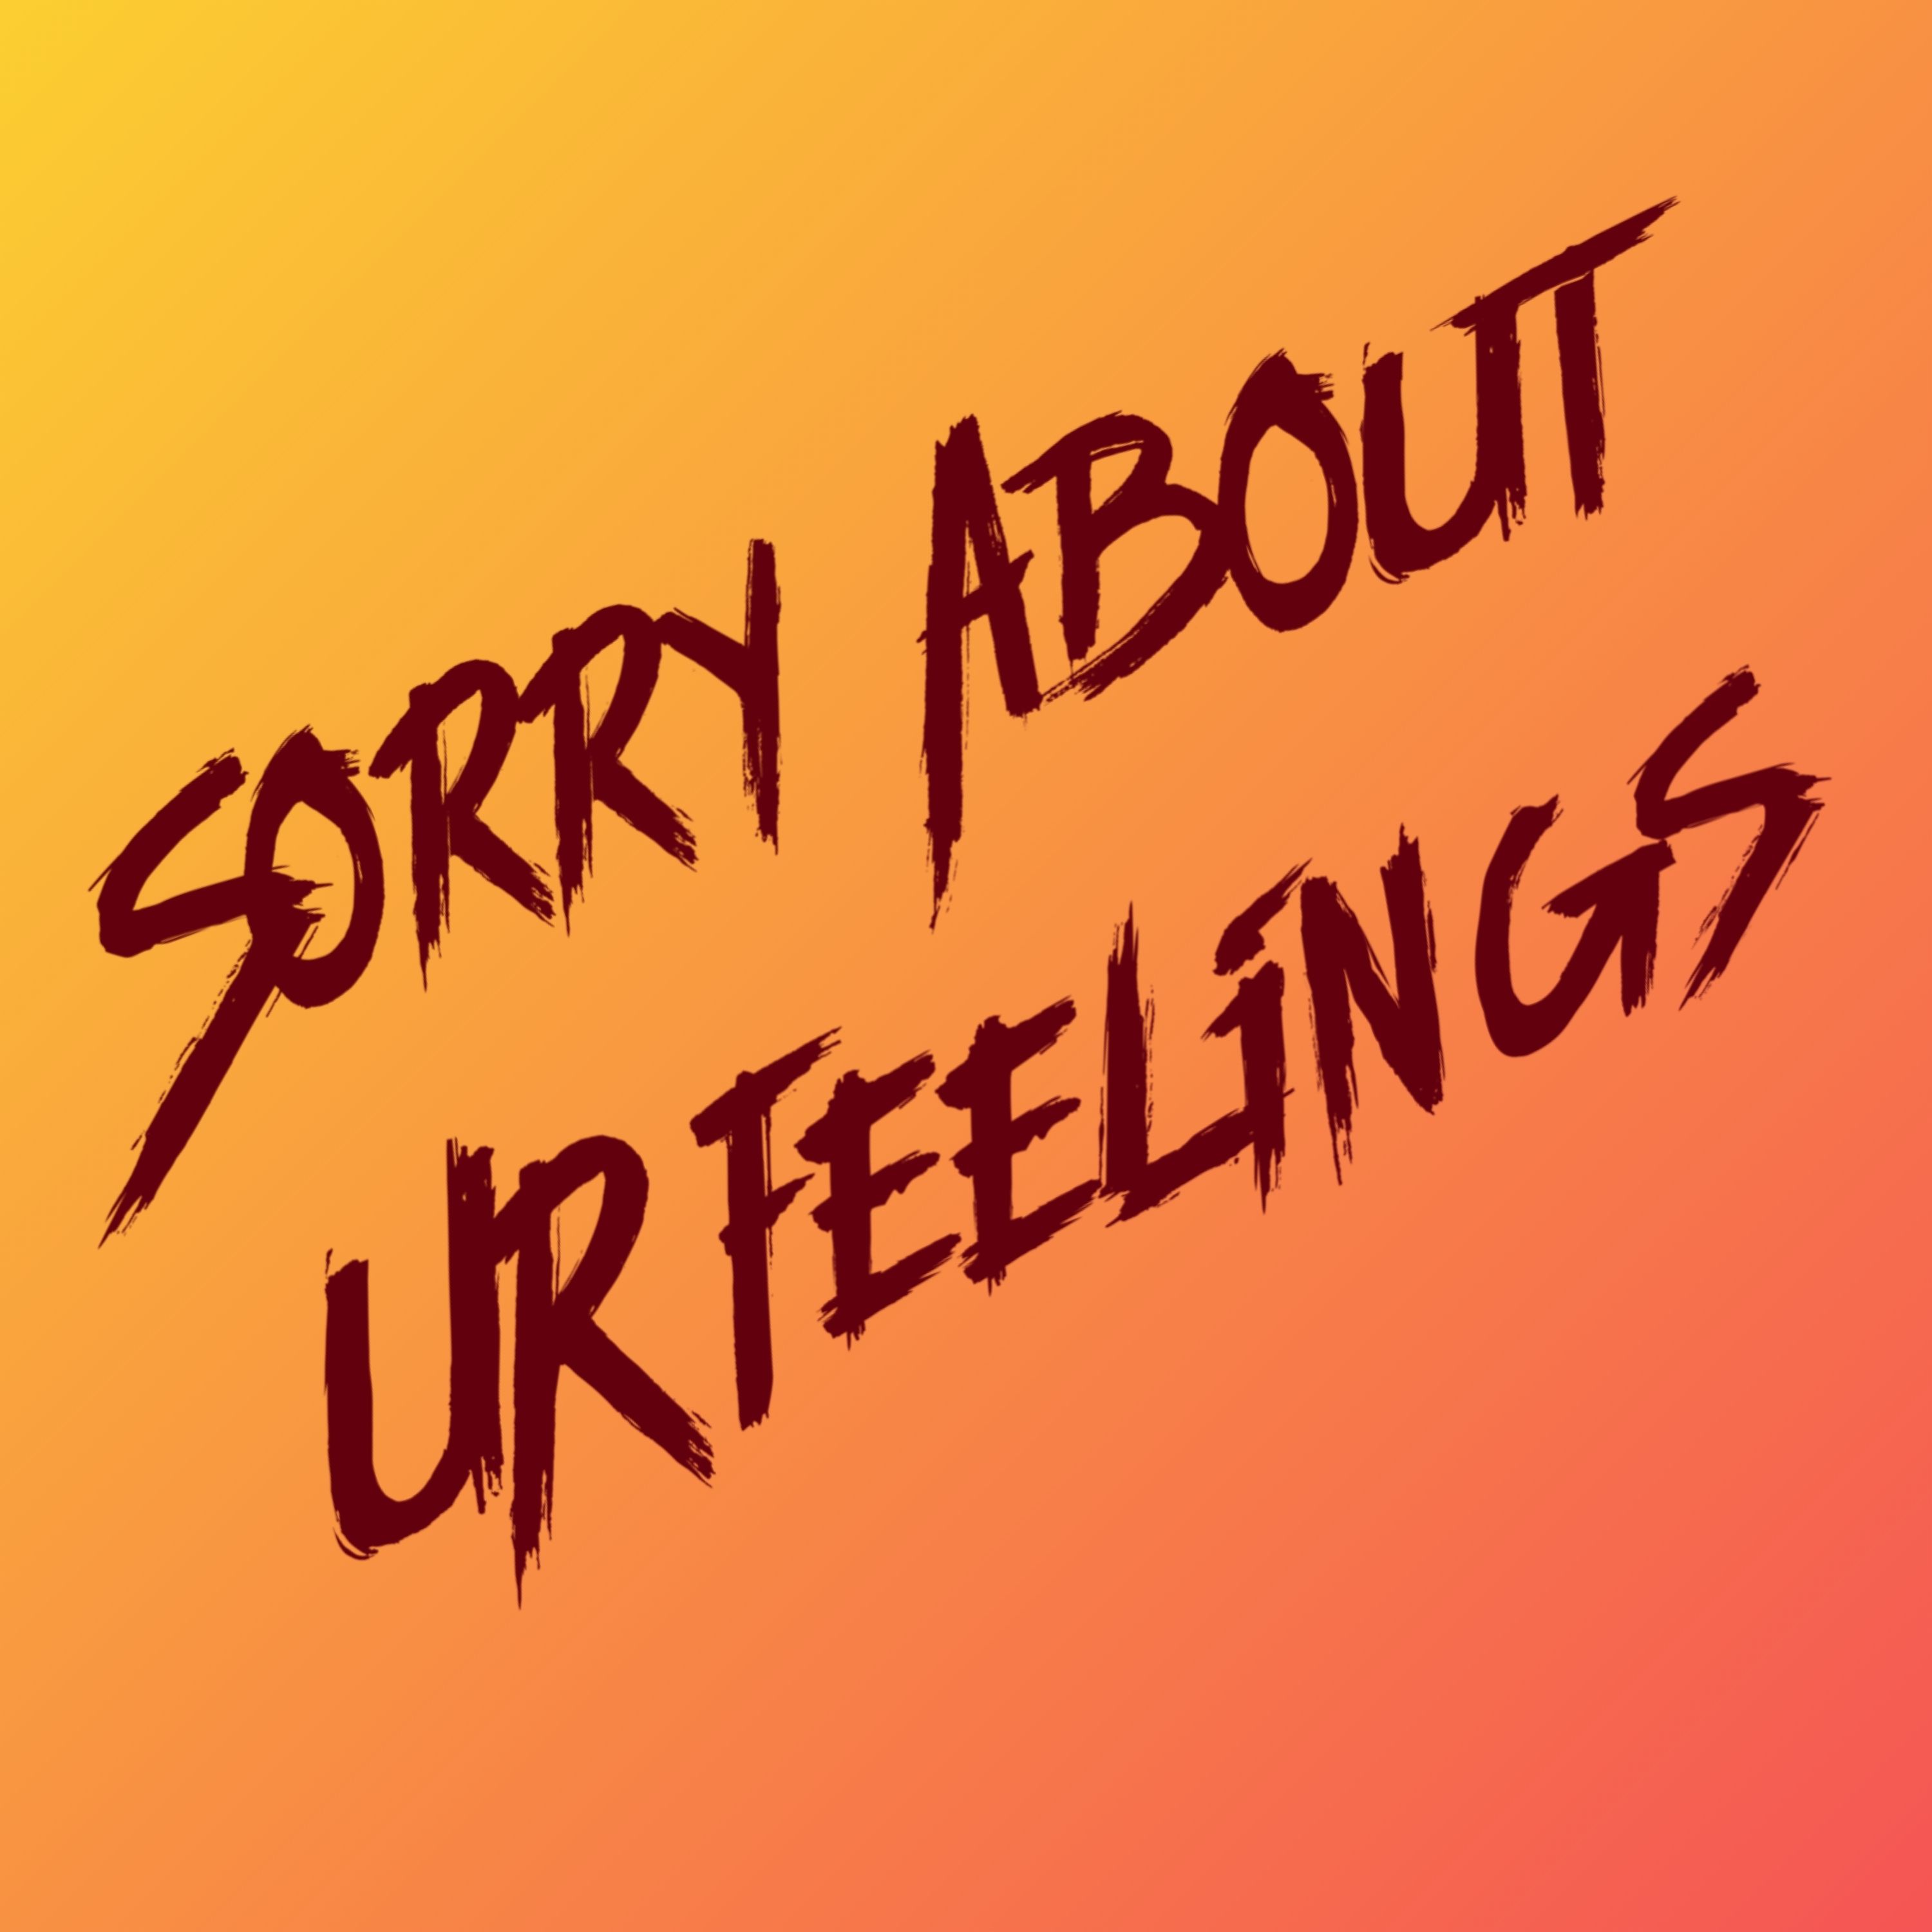 Sorry About Ur Feelings cover logo